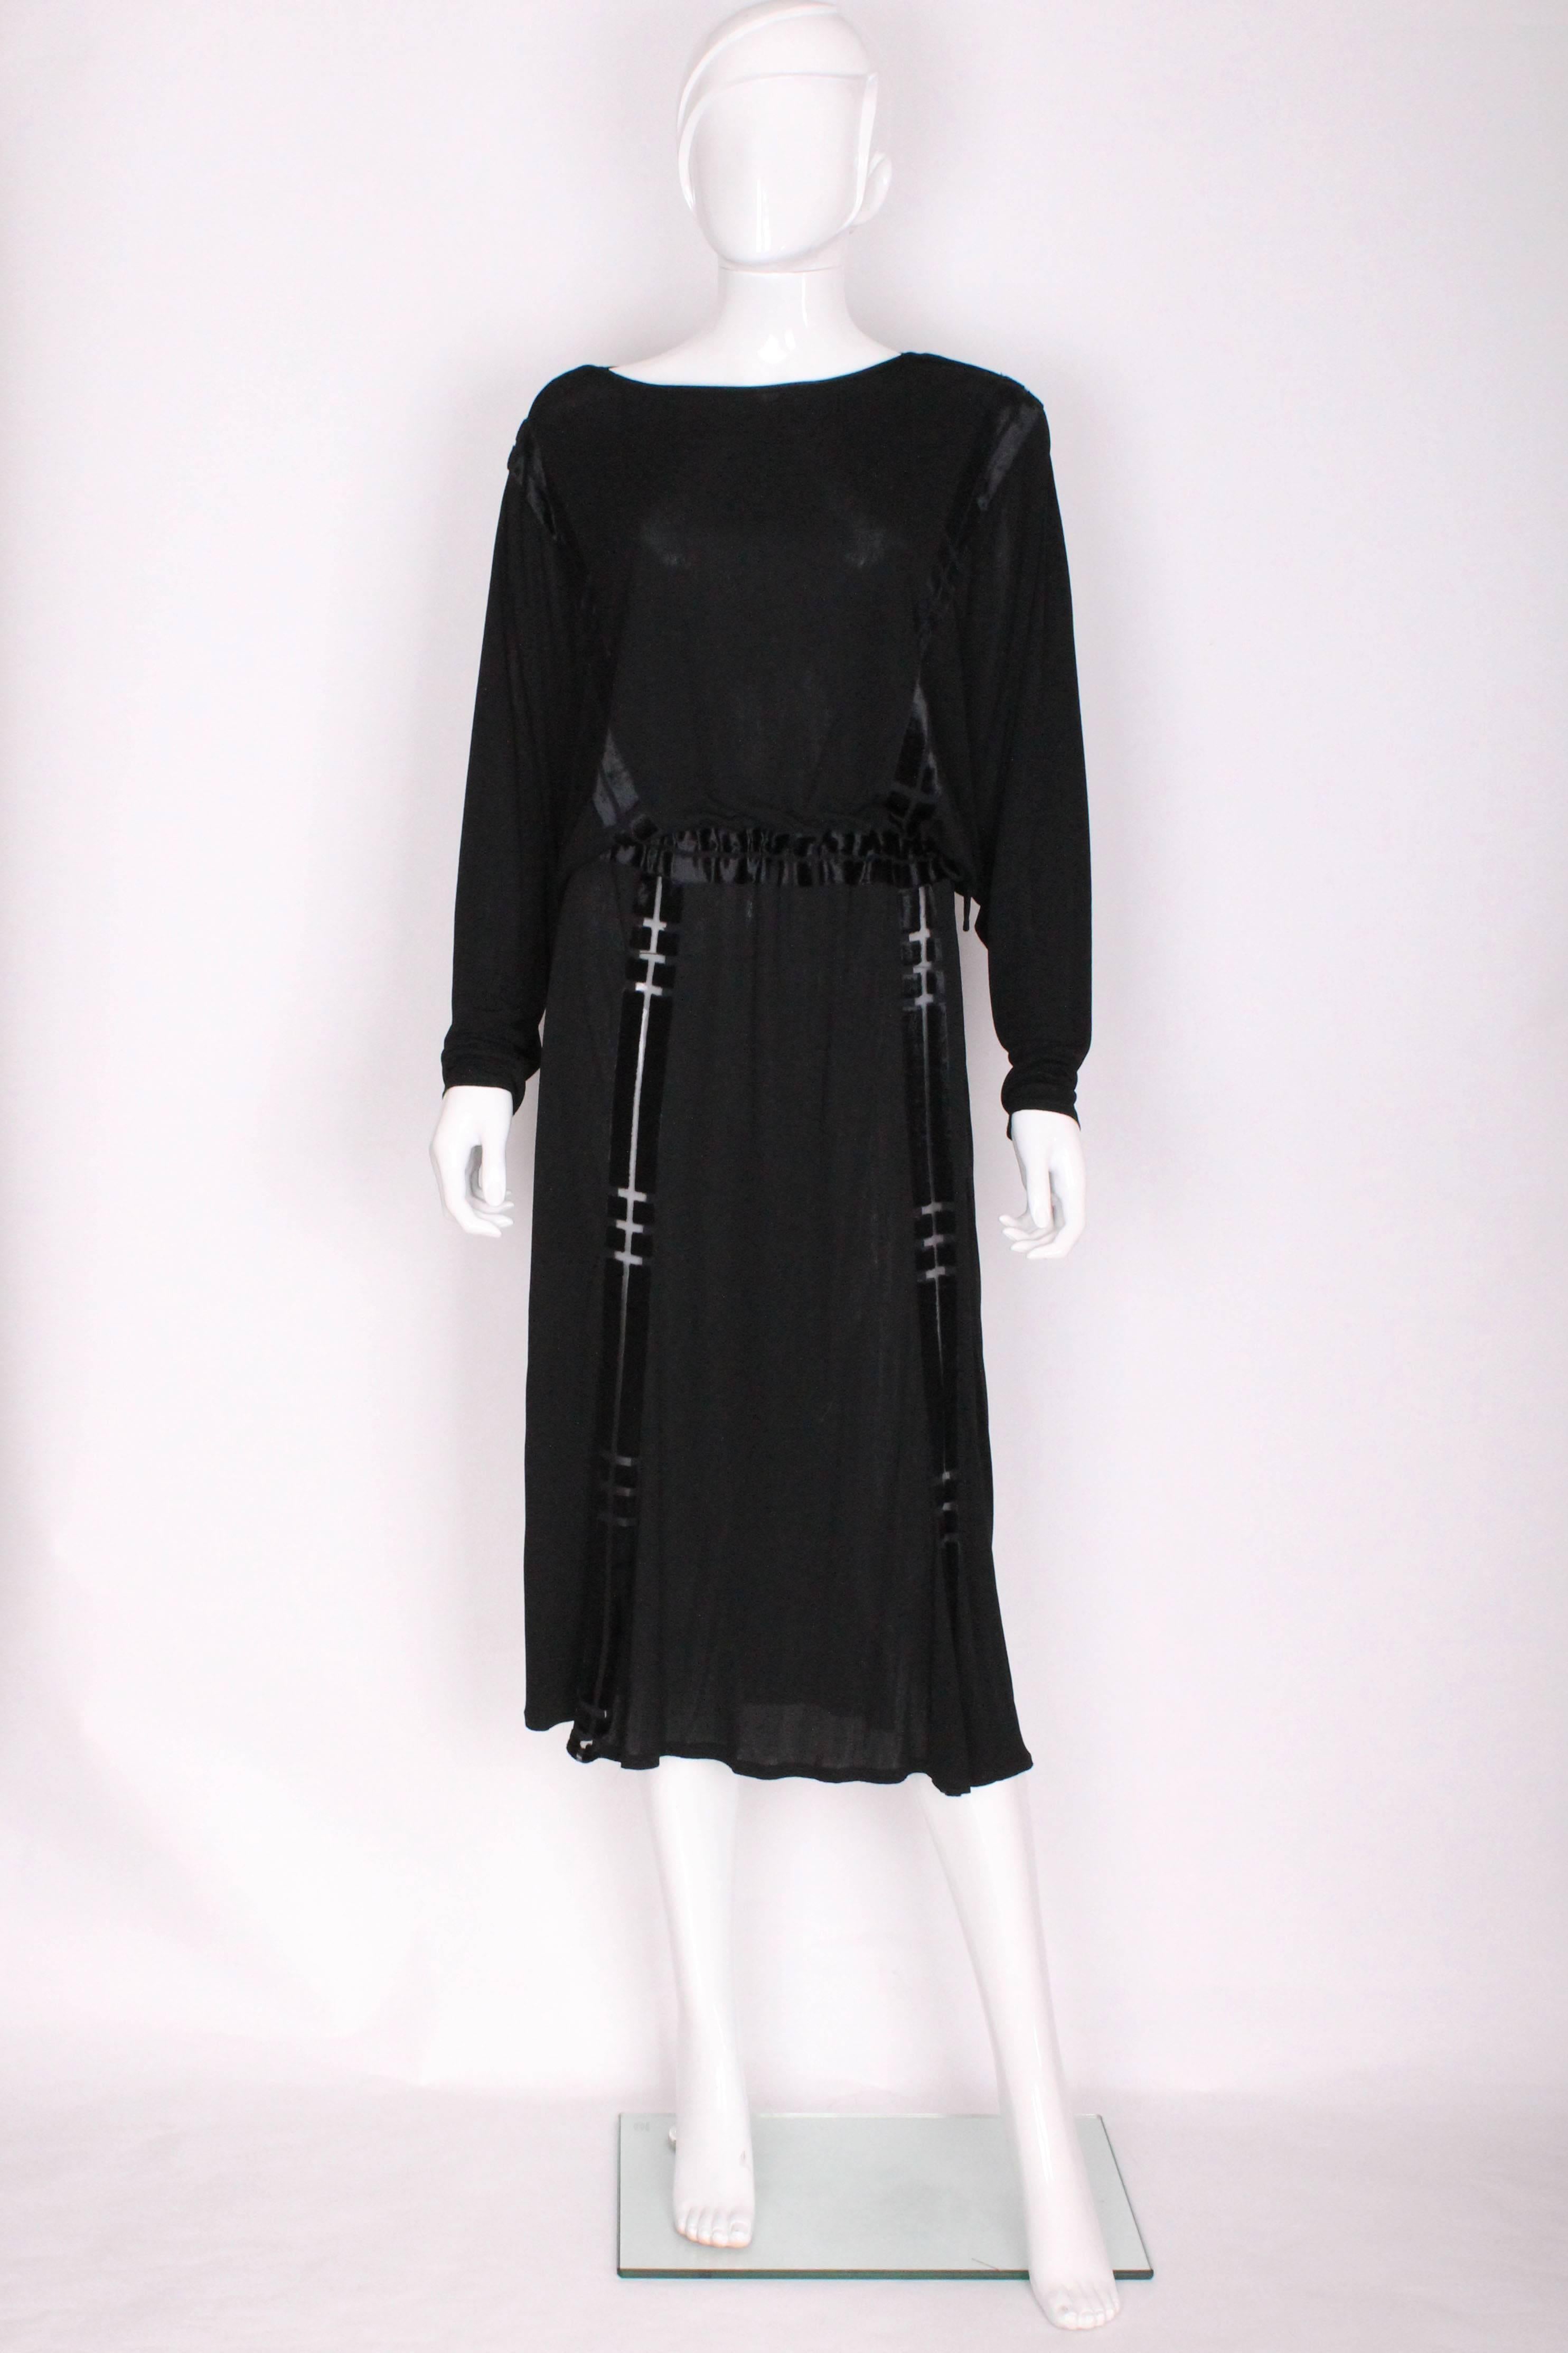 A great cocktail dress by British designer Janice Wainwright.In viscose with velvet detail in geometric blocks.The dress is marked size 16 ( an old size 16) but has a drawstring waist , so can fit various sizes.